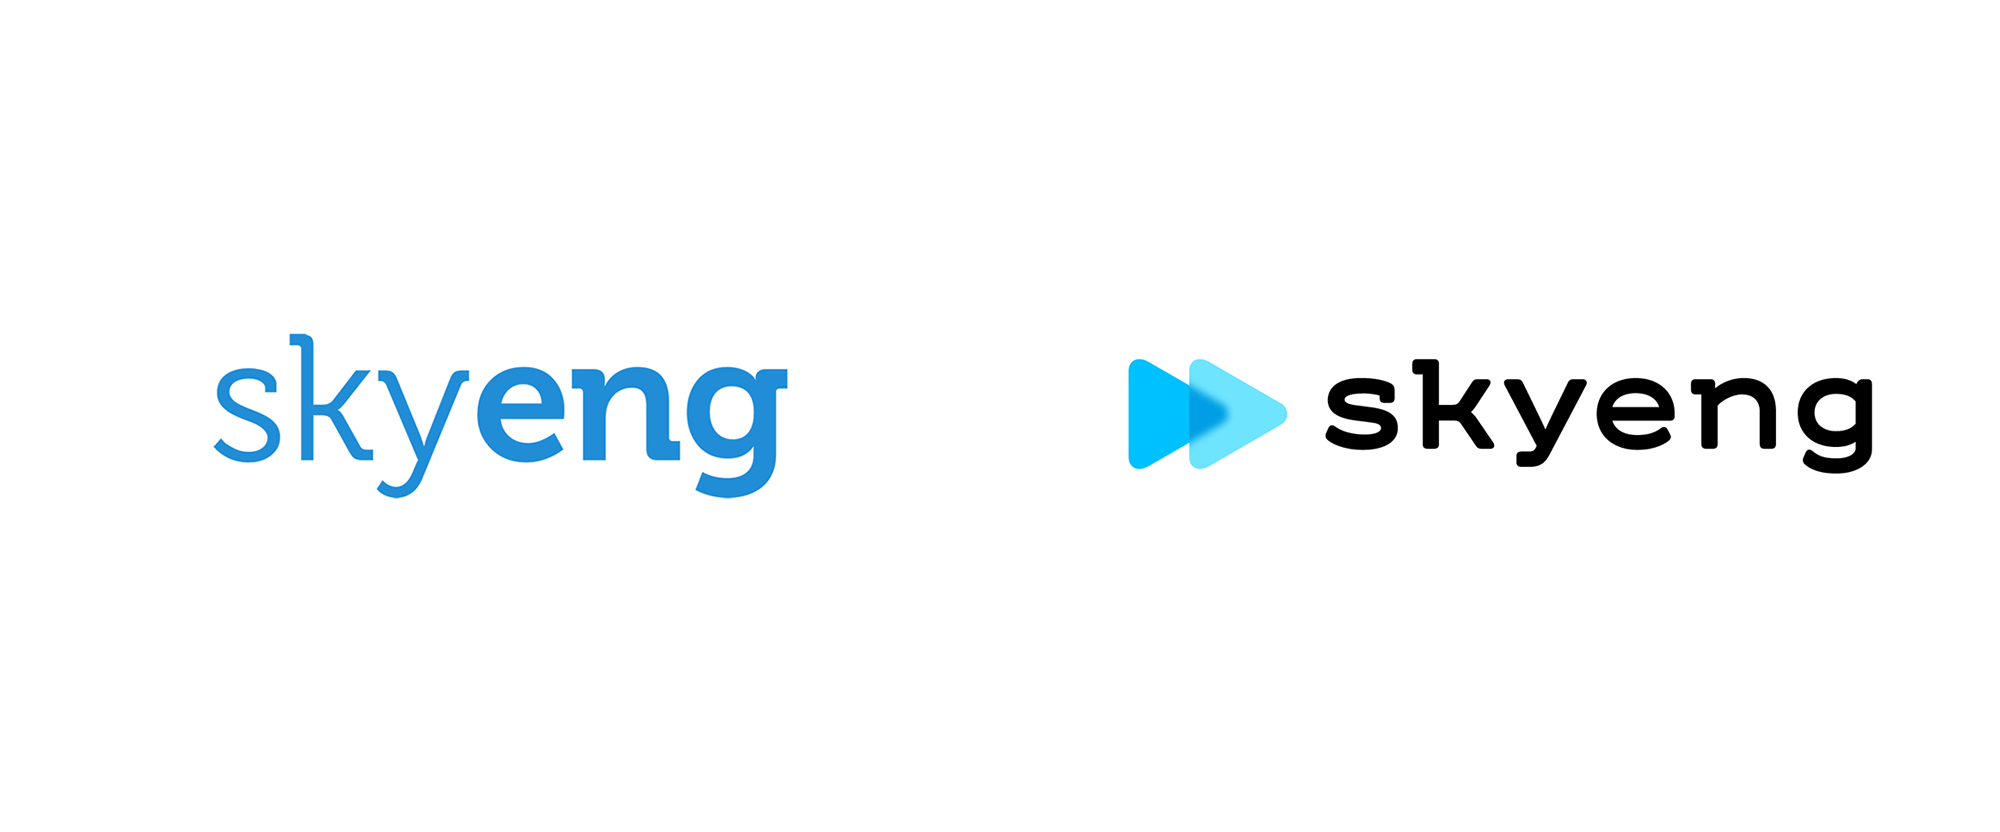 New Logo and Identity for Skyeng by Shuka